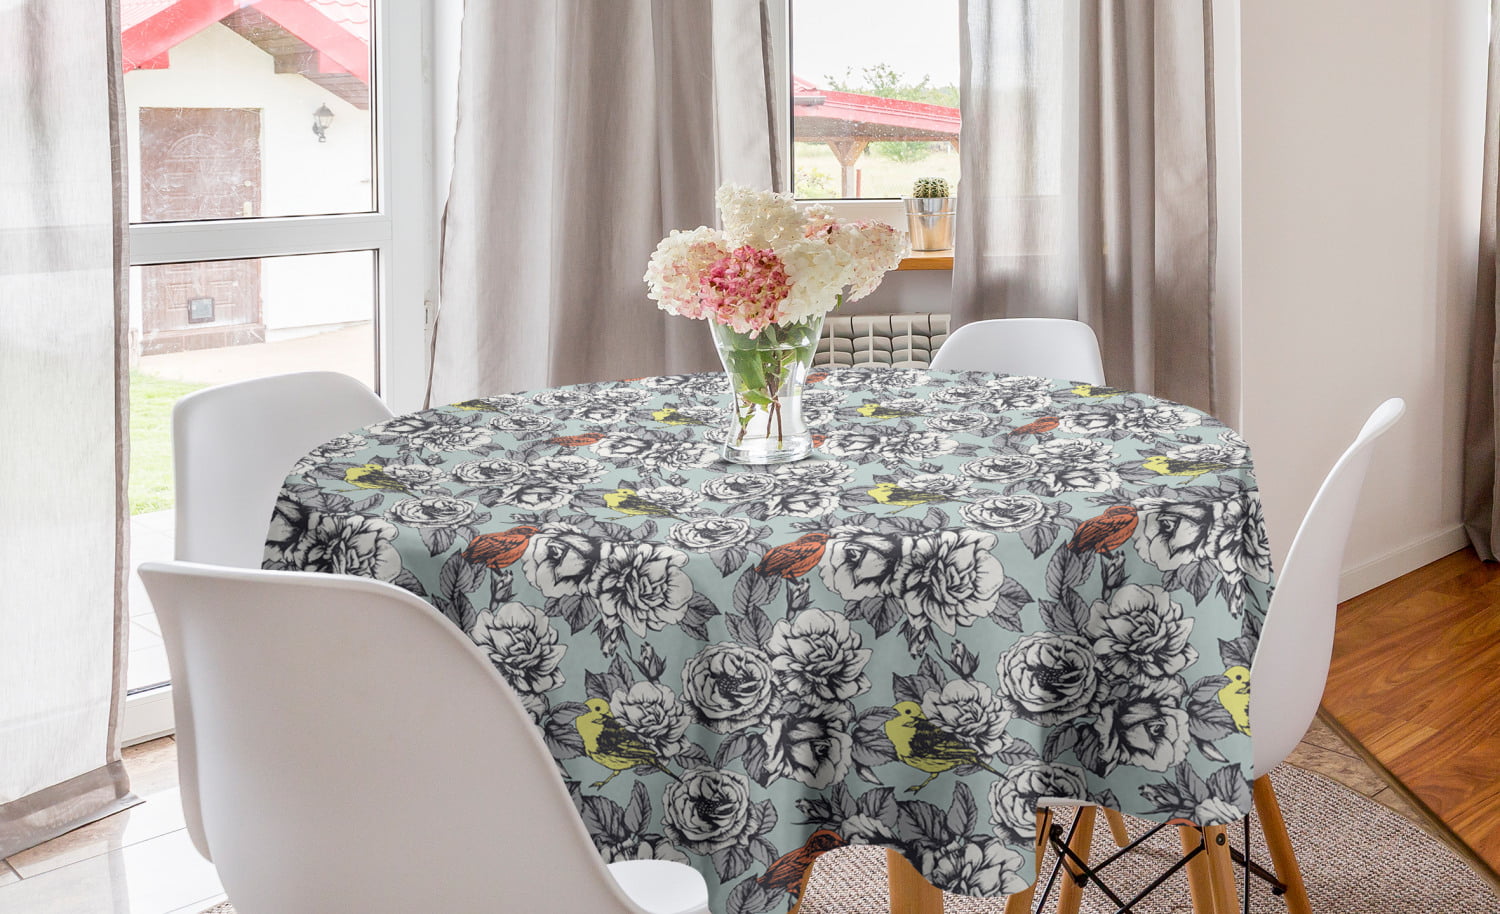 Vintage Tablecloth Floral Bird Print Table Cloth Cover Kitchen Dining Home Decor